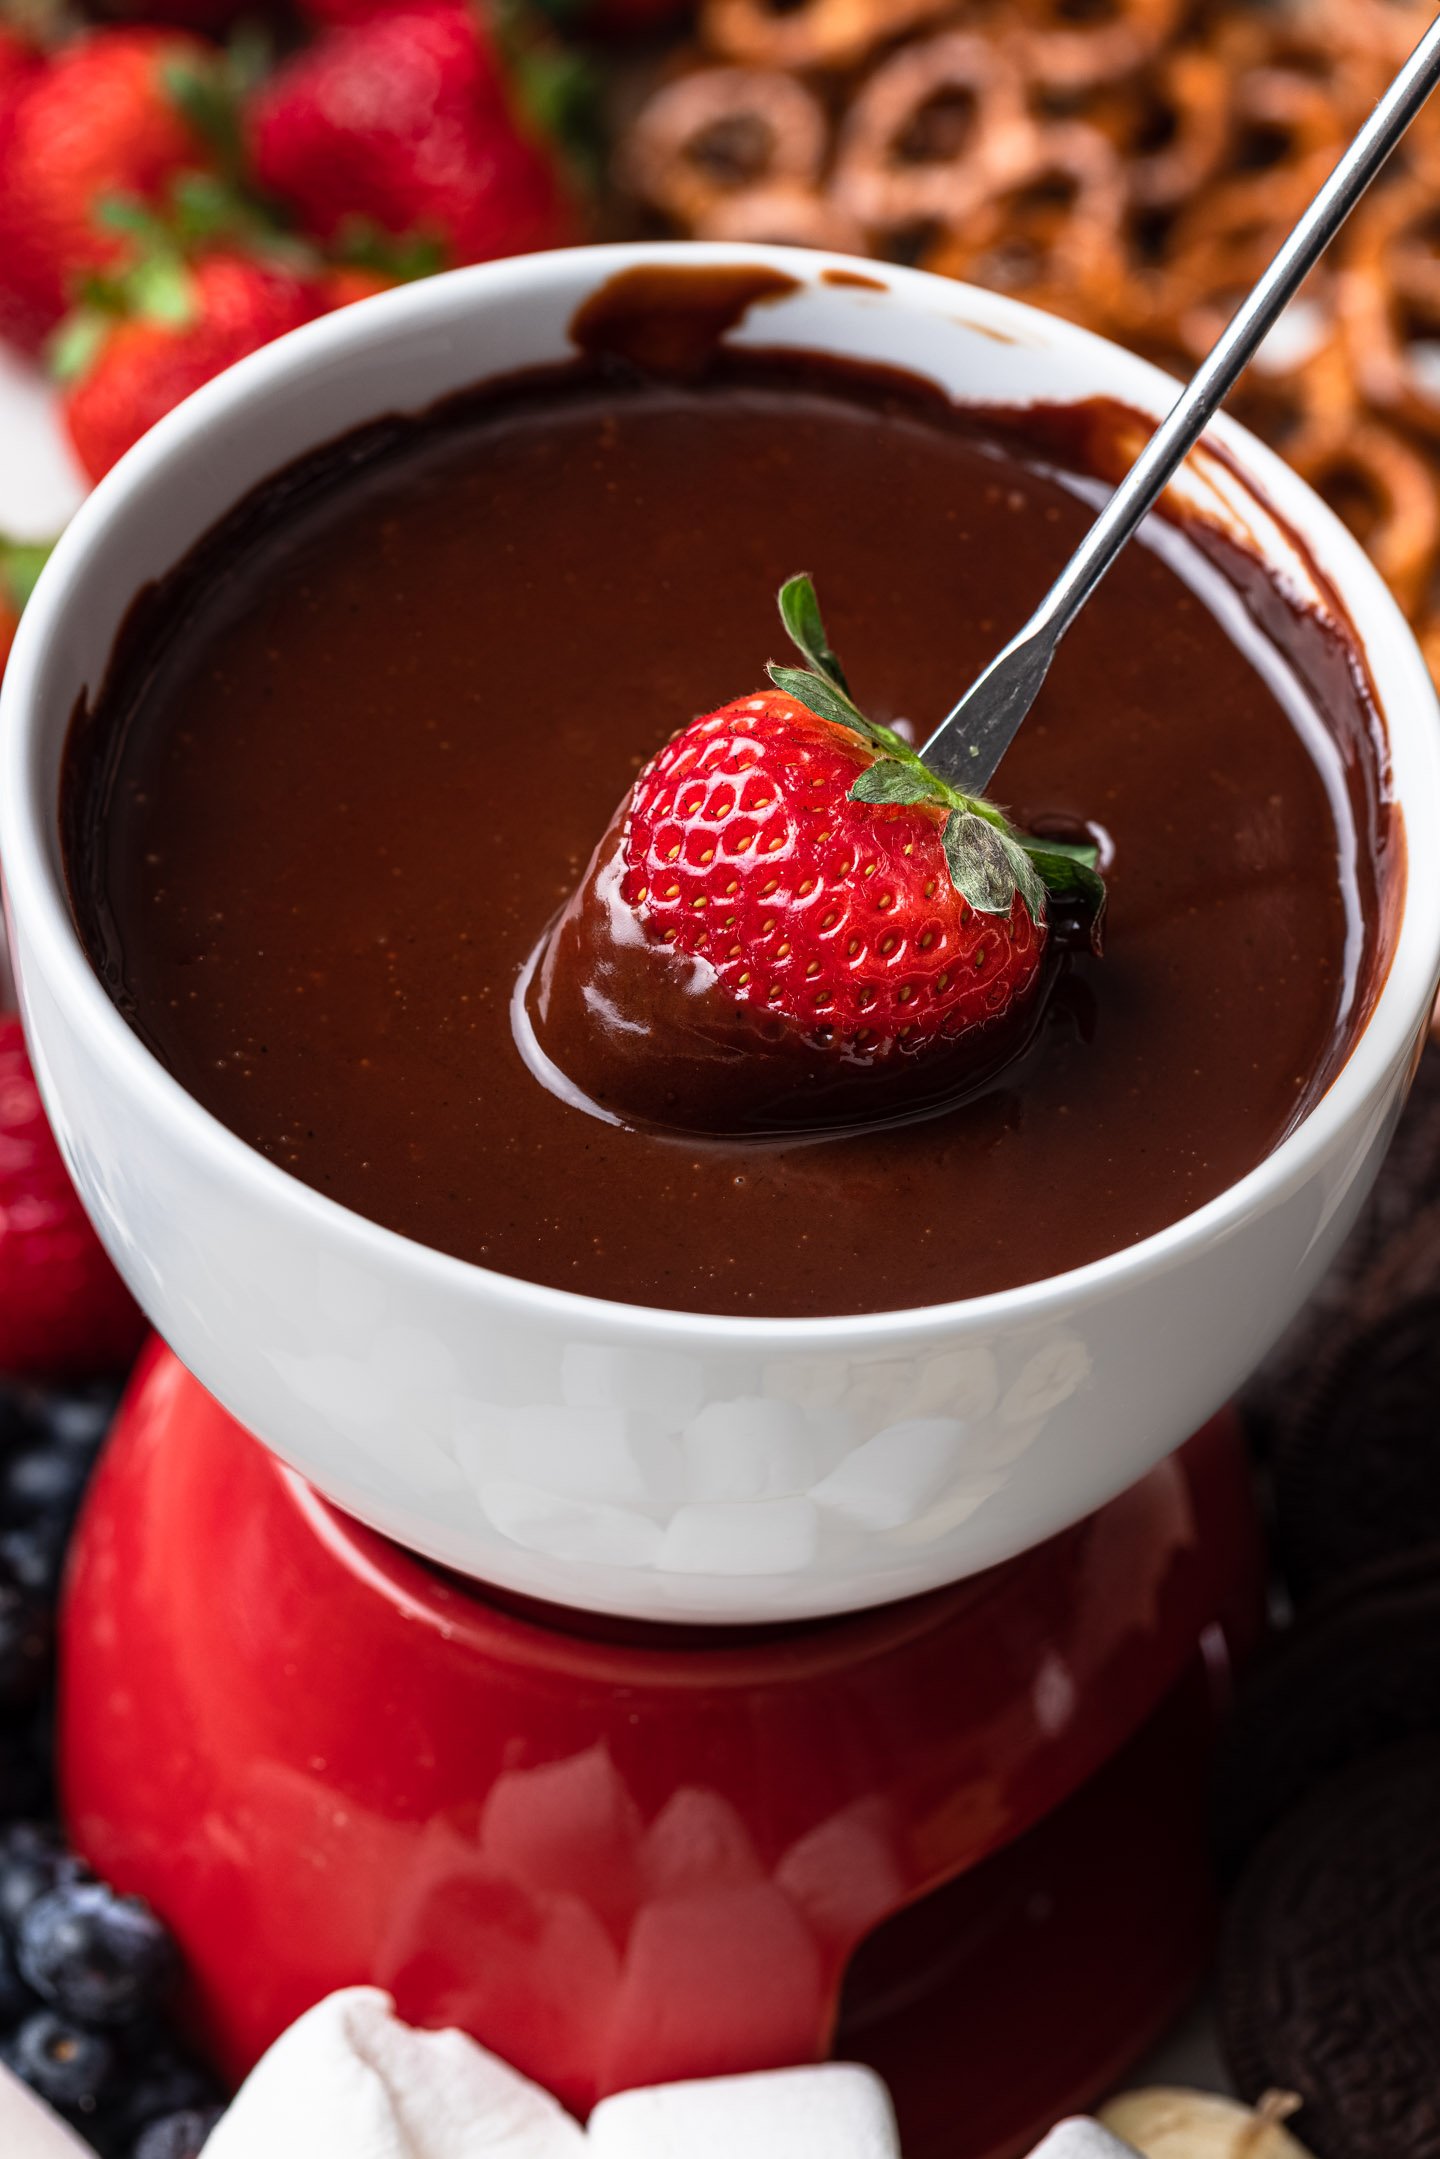 Easy Chocolate Fondue Recipe (Only 5 ingredients!) - Olivia's Cuisine